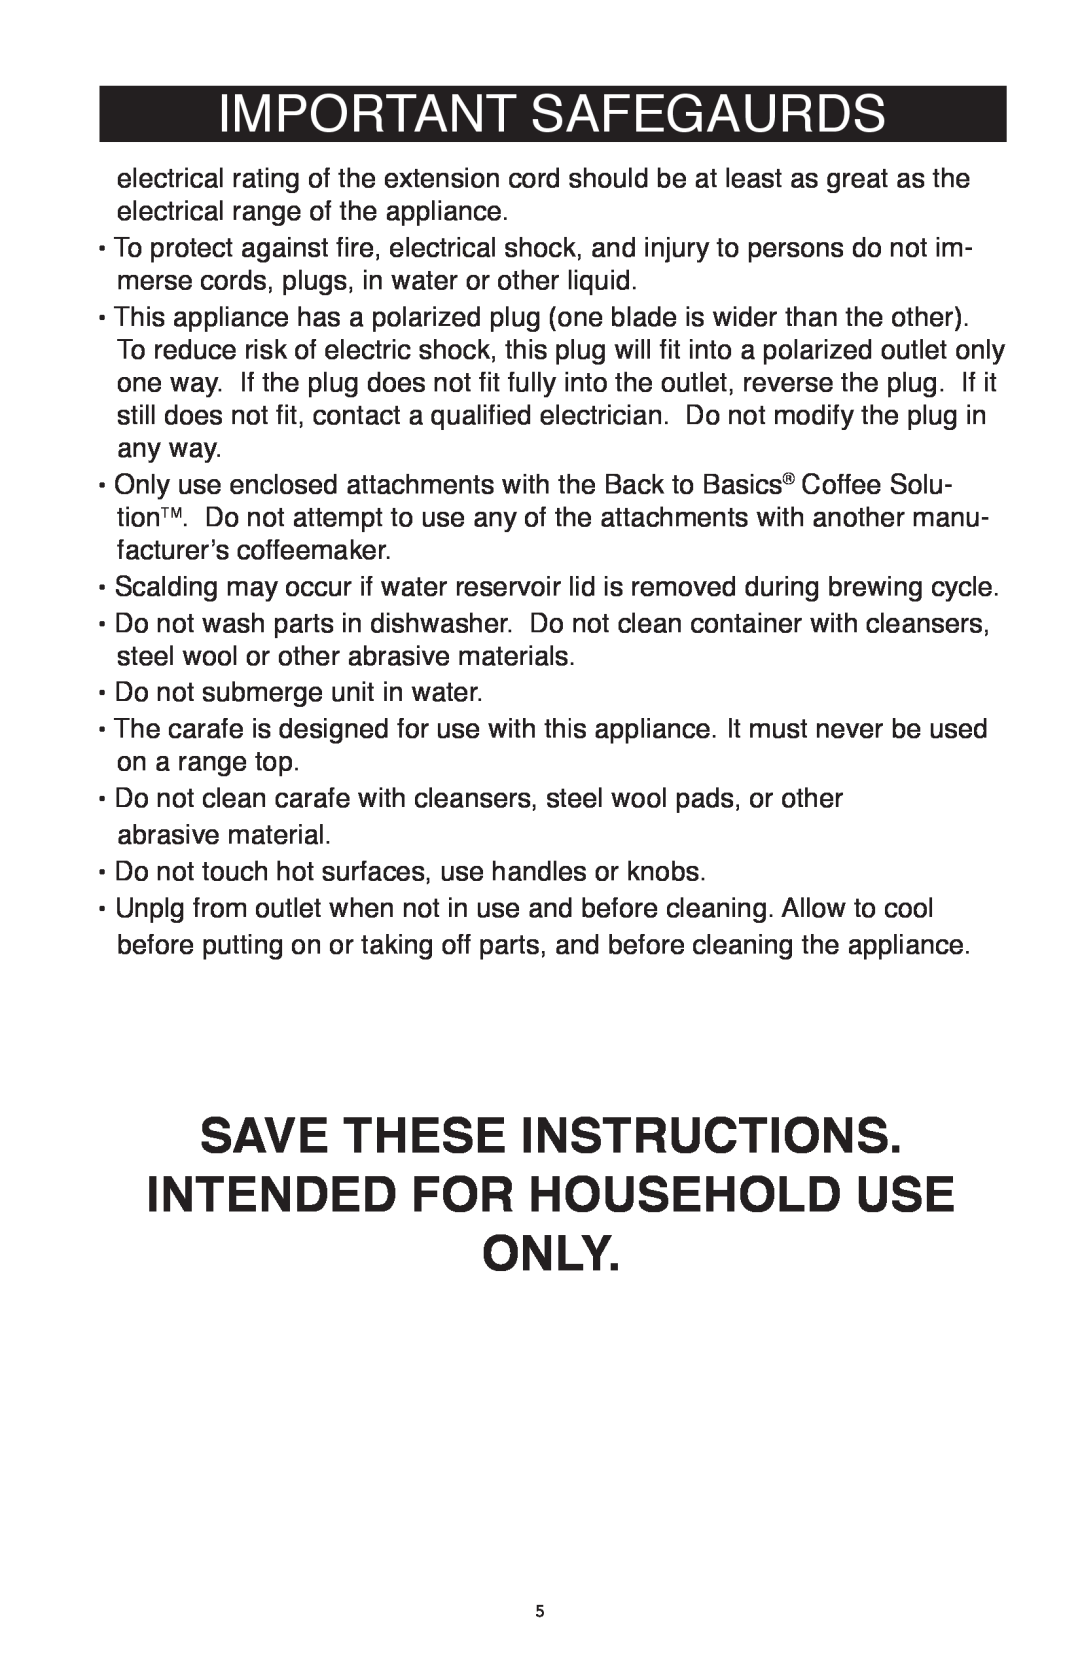 West Bend Back to Basics CC500 manual Save These Instructions Intended For Household Use Only, Important Safegaurds 